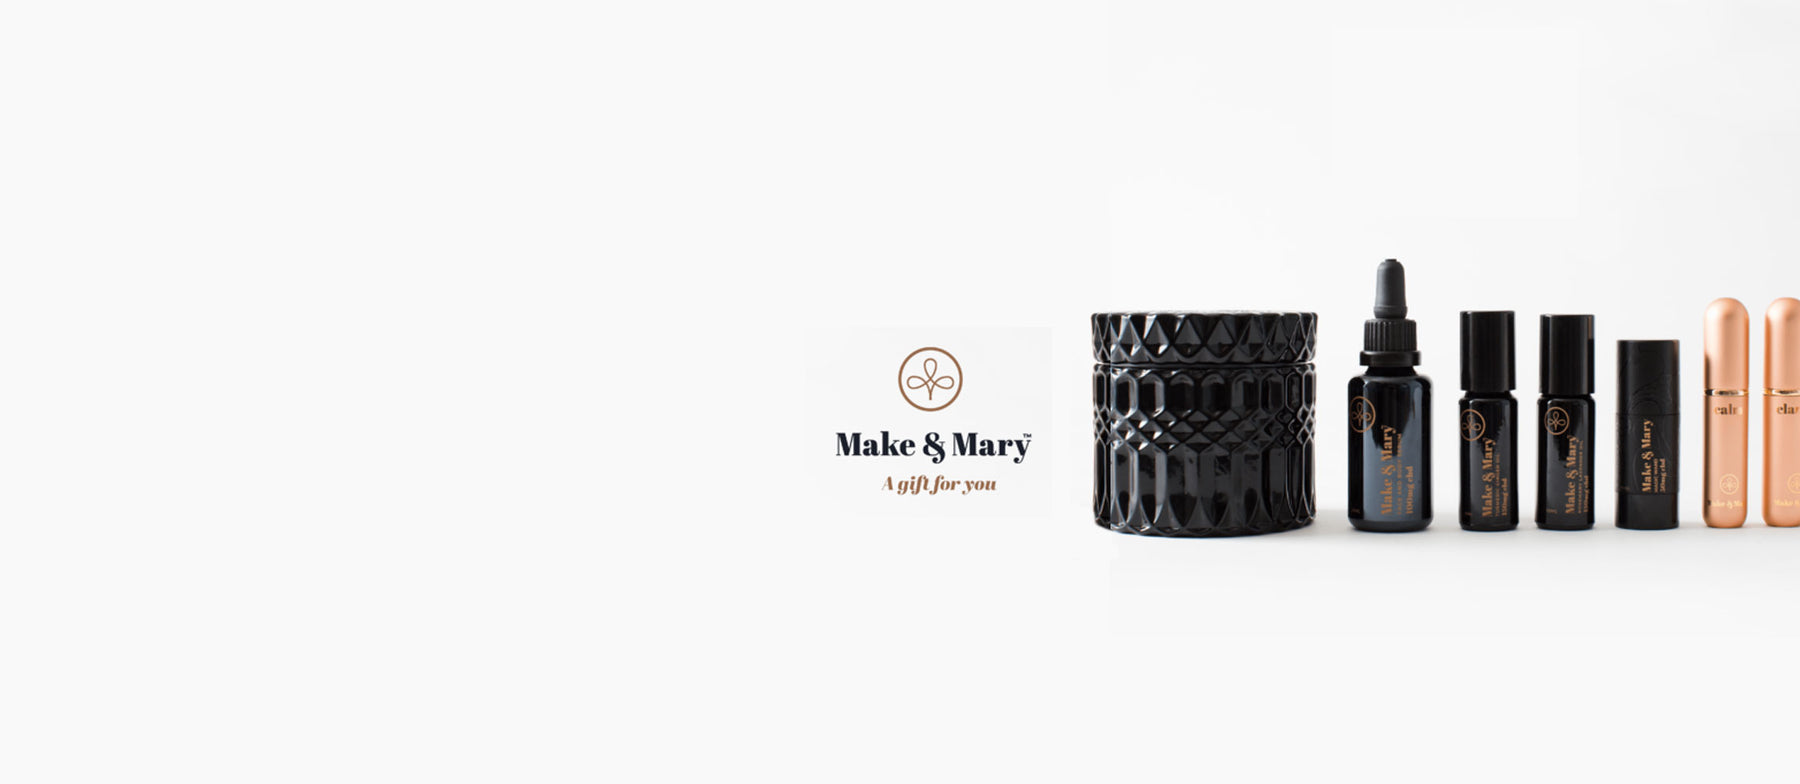 Make & Mary CBD Products Houston - Candle, Aromatherapy, Tinctures